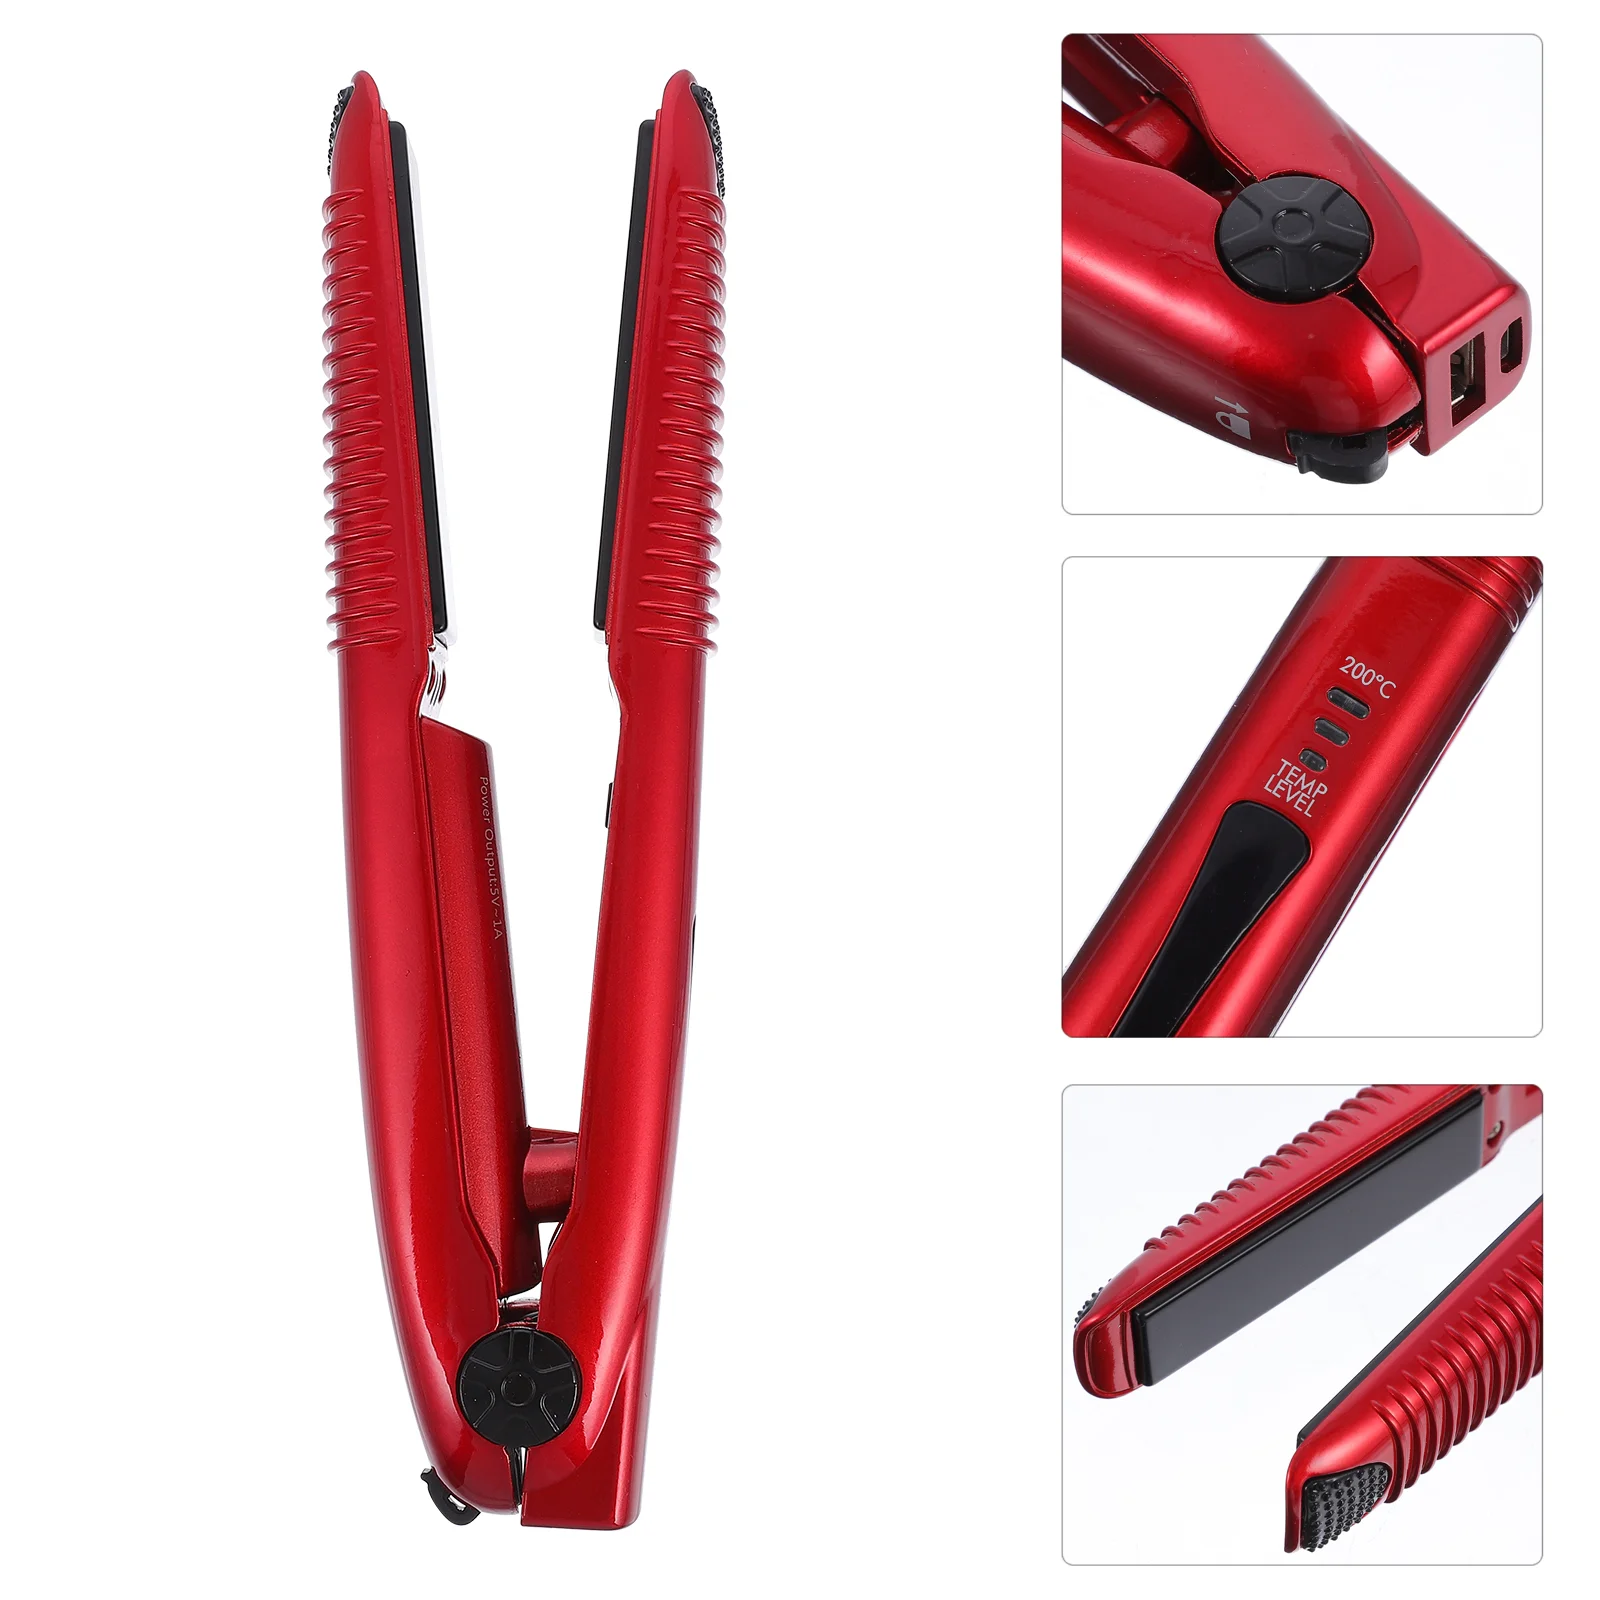 

Rechargeable Hair Small Cordless Hair Travel and Curler 2 in 1, 3 Heating Options to 200℃, Red